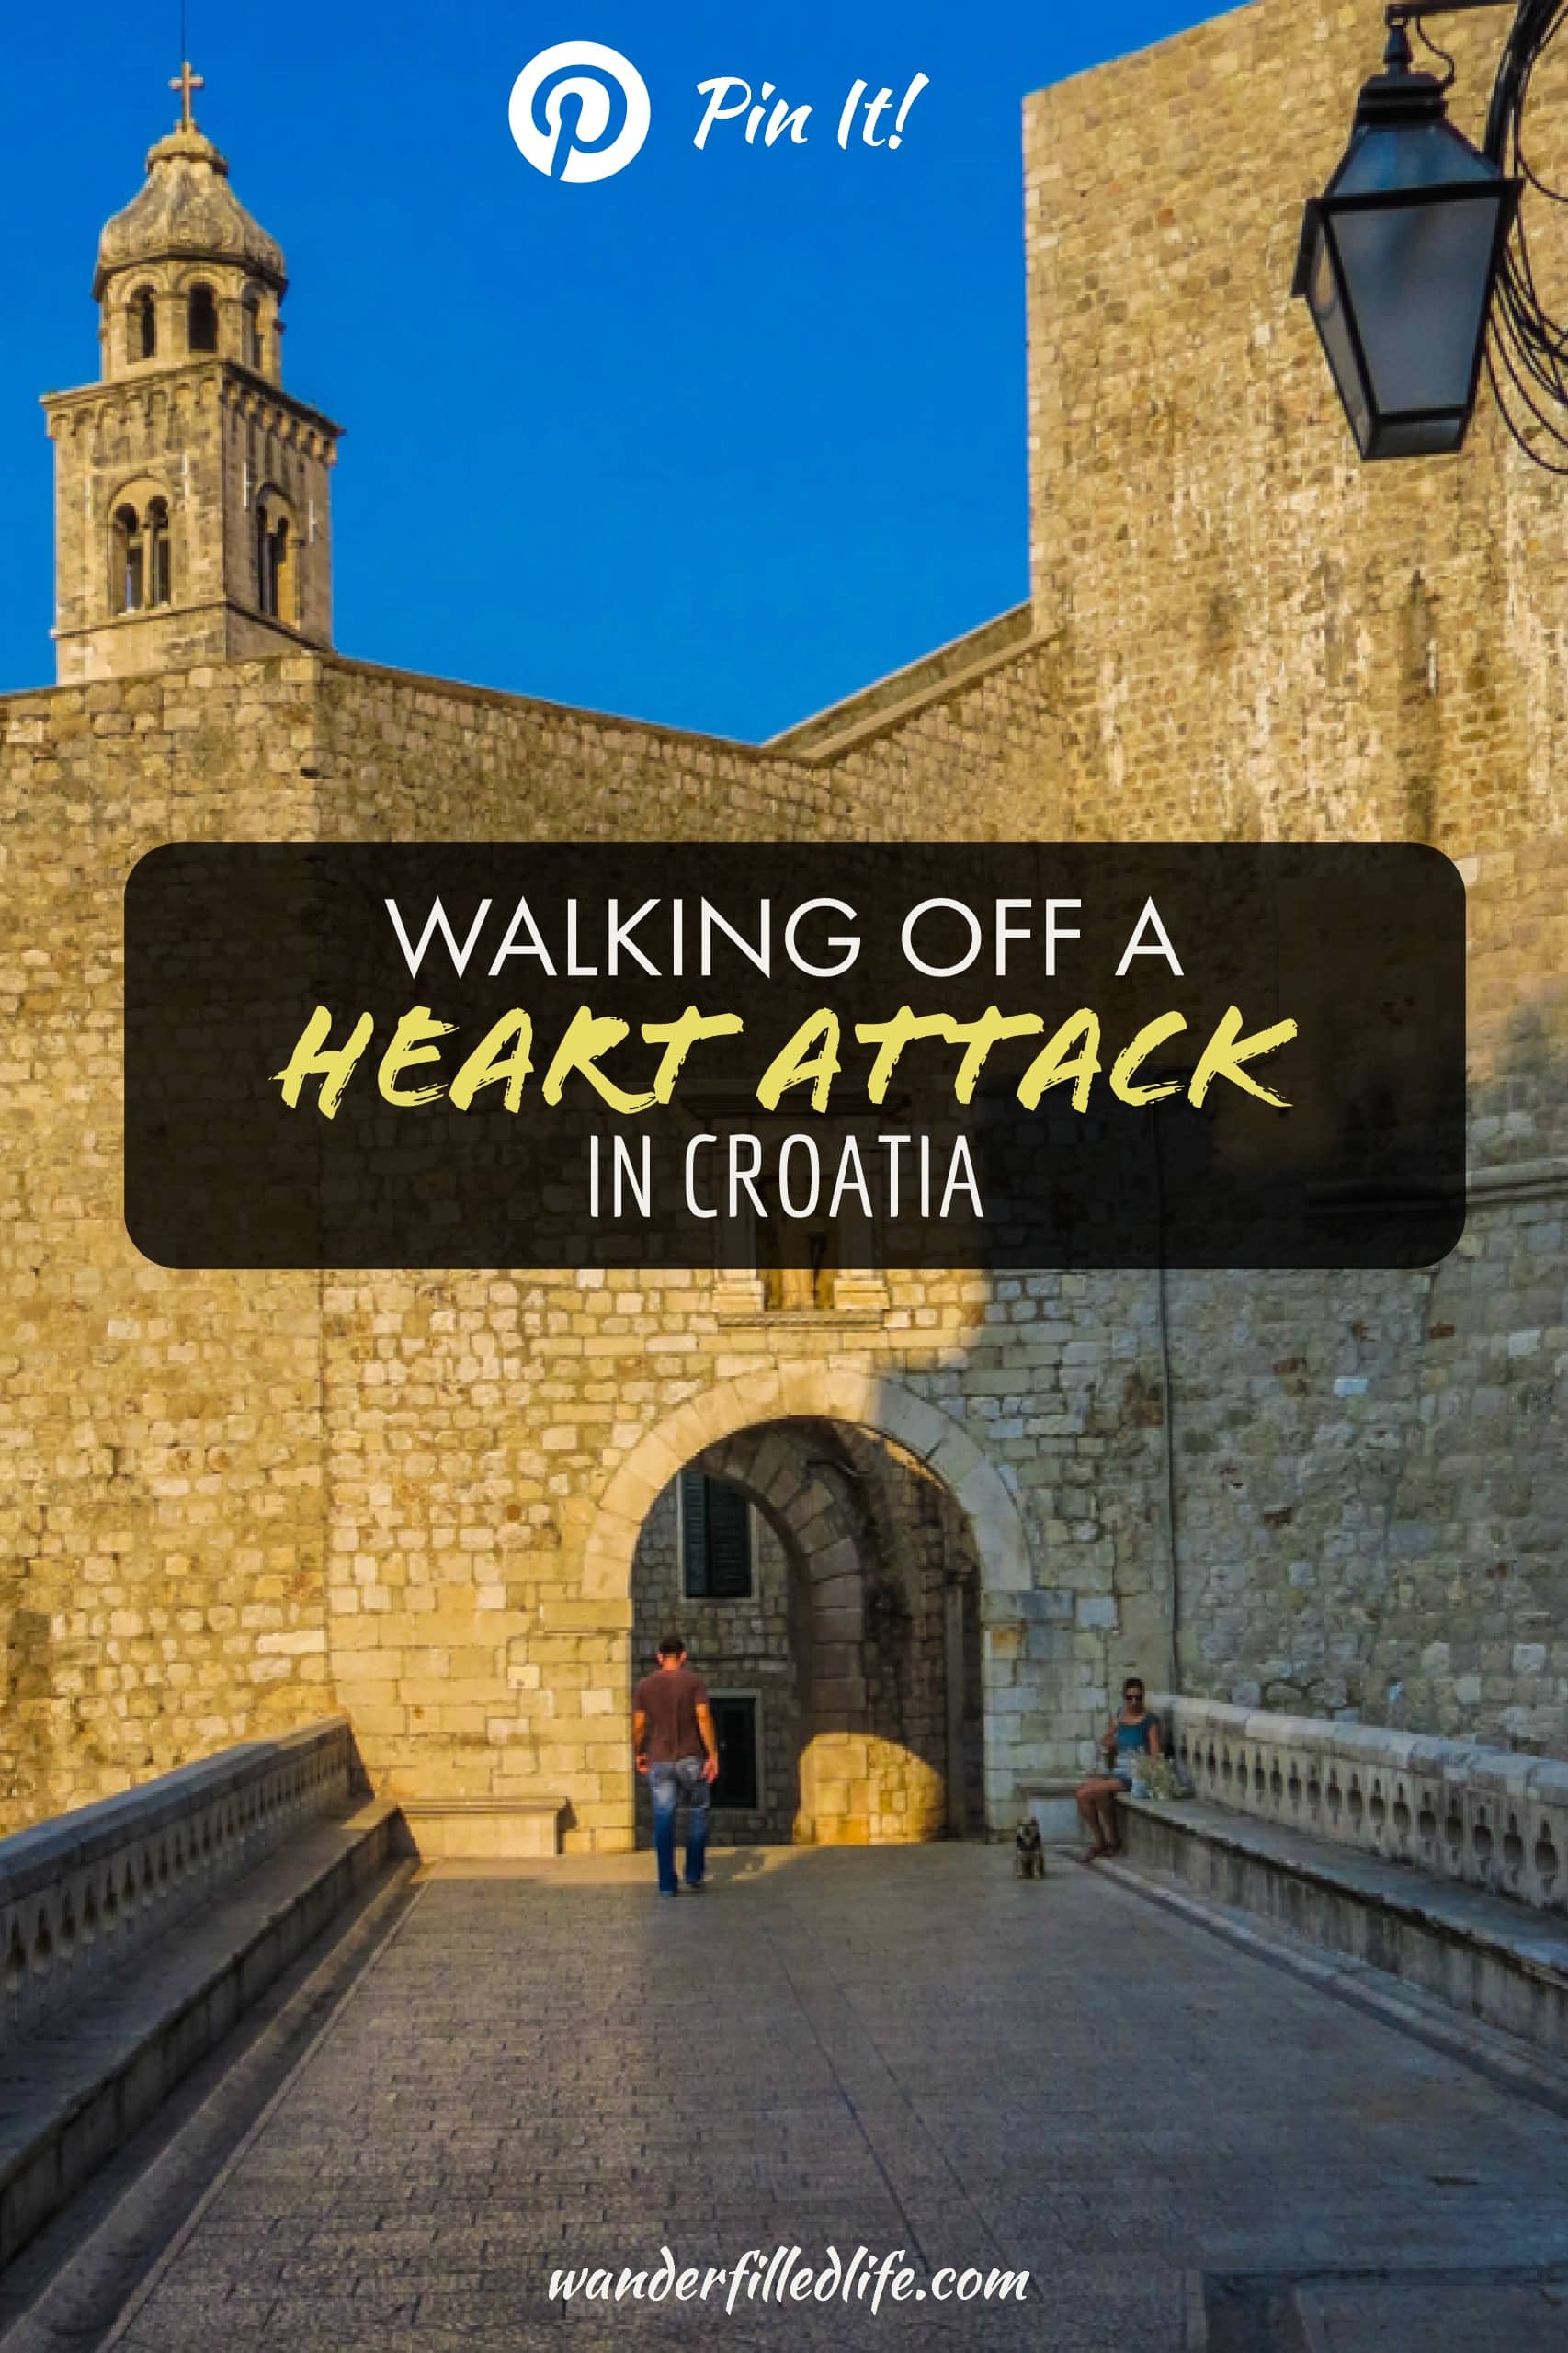 Our experience as Grant unknowingly suffered a heart attack in Croatia. What we learned and how it has affected our future travels and everyday life.